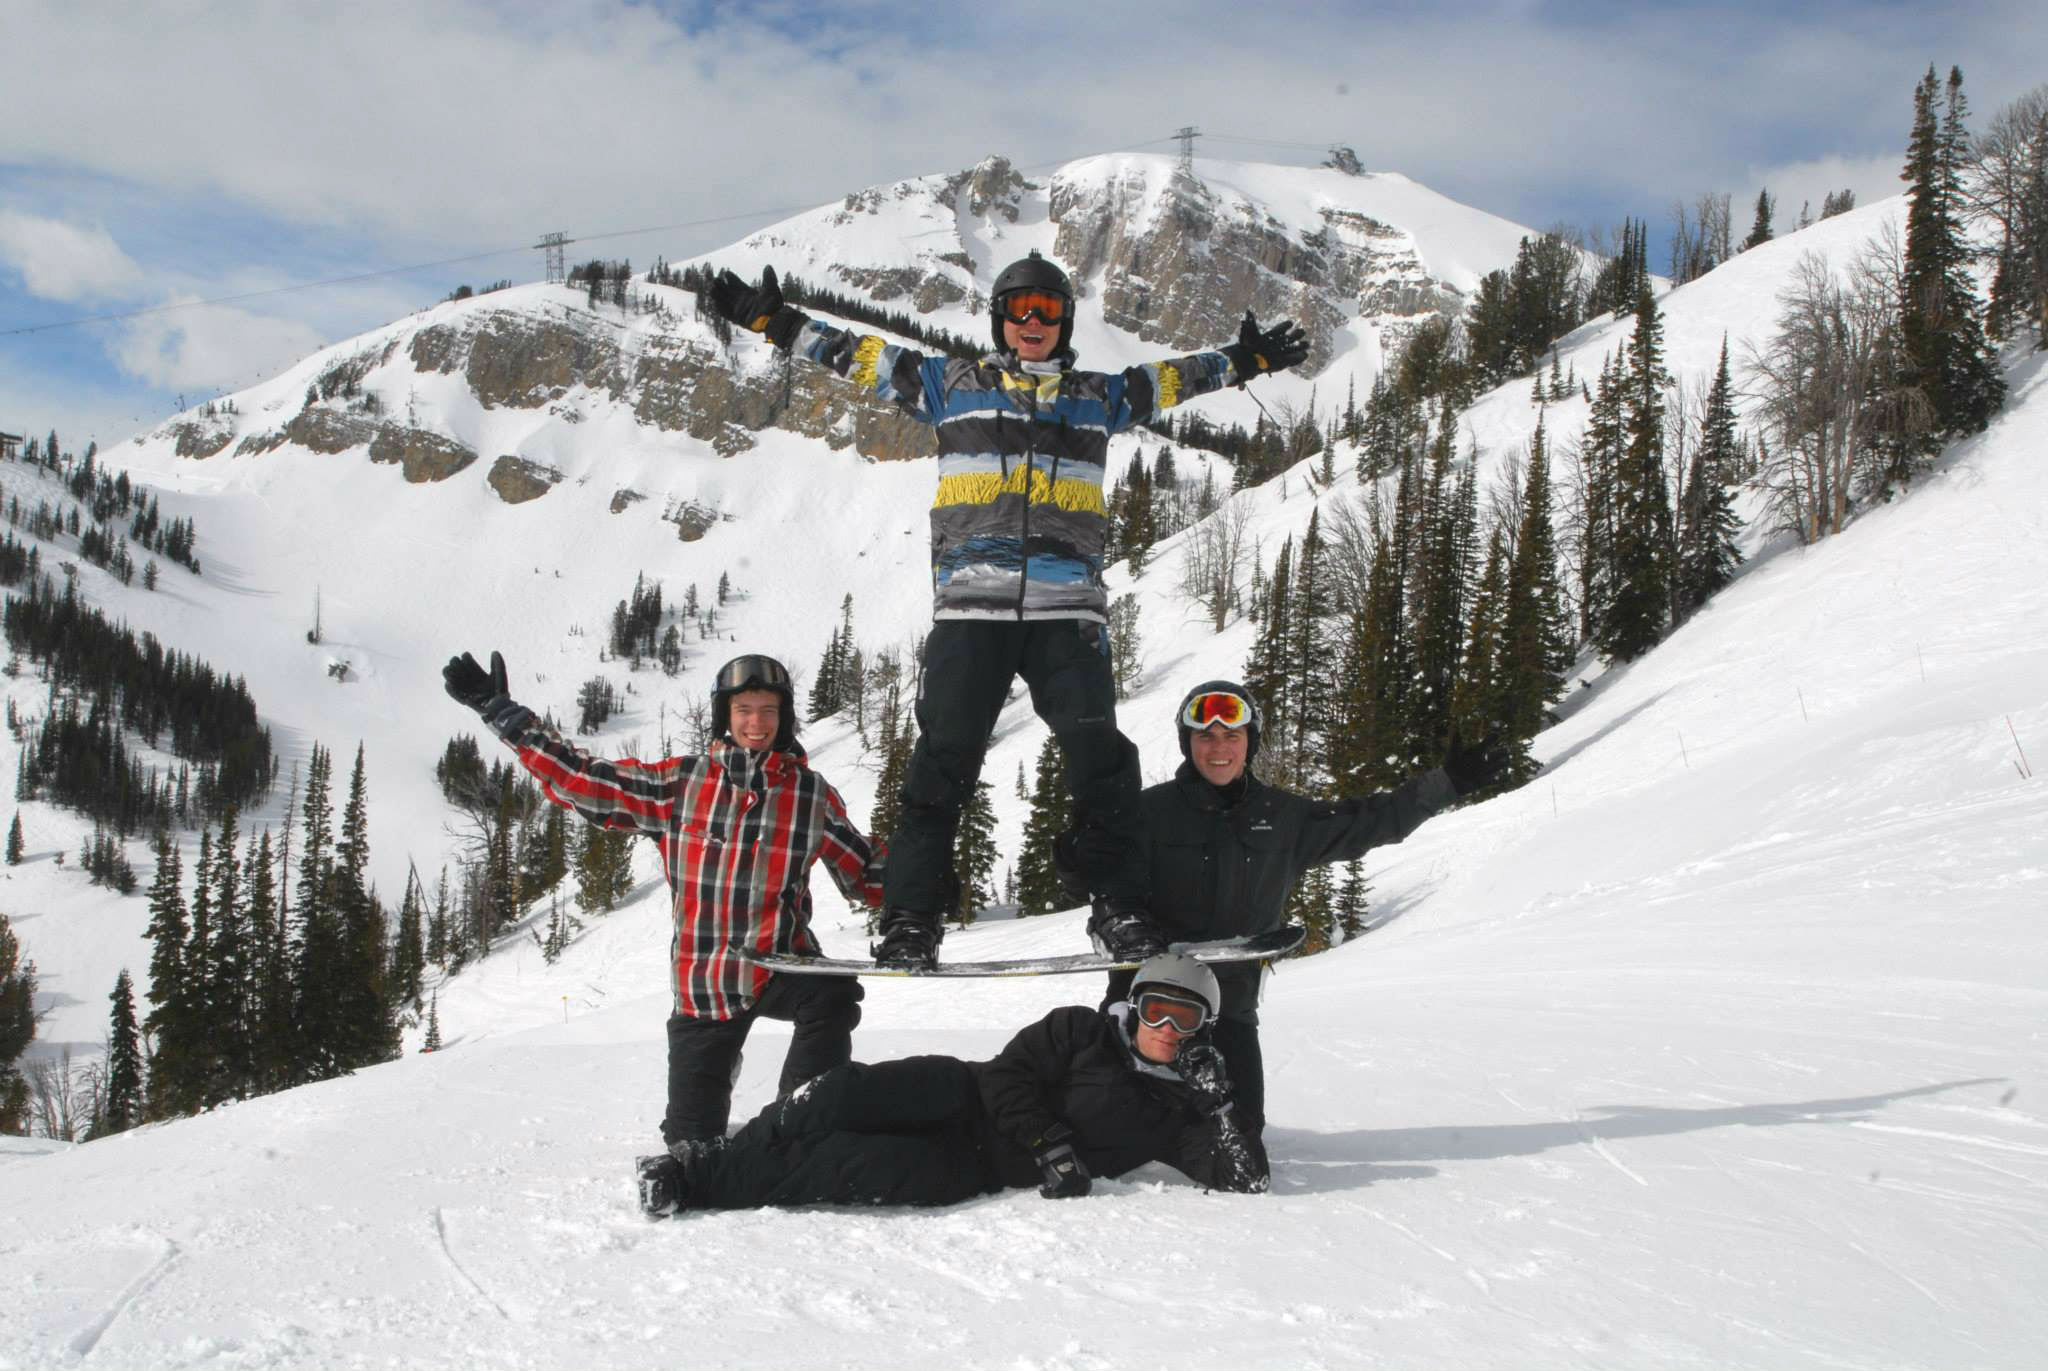 A few mountain-goers pause for a photo-op at last year's trip to Jackson Hole.